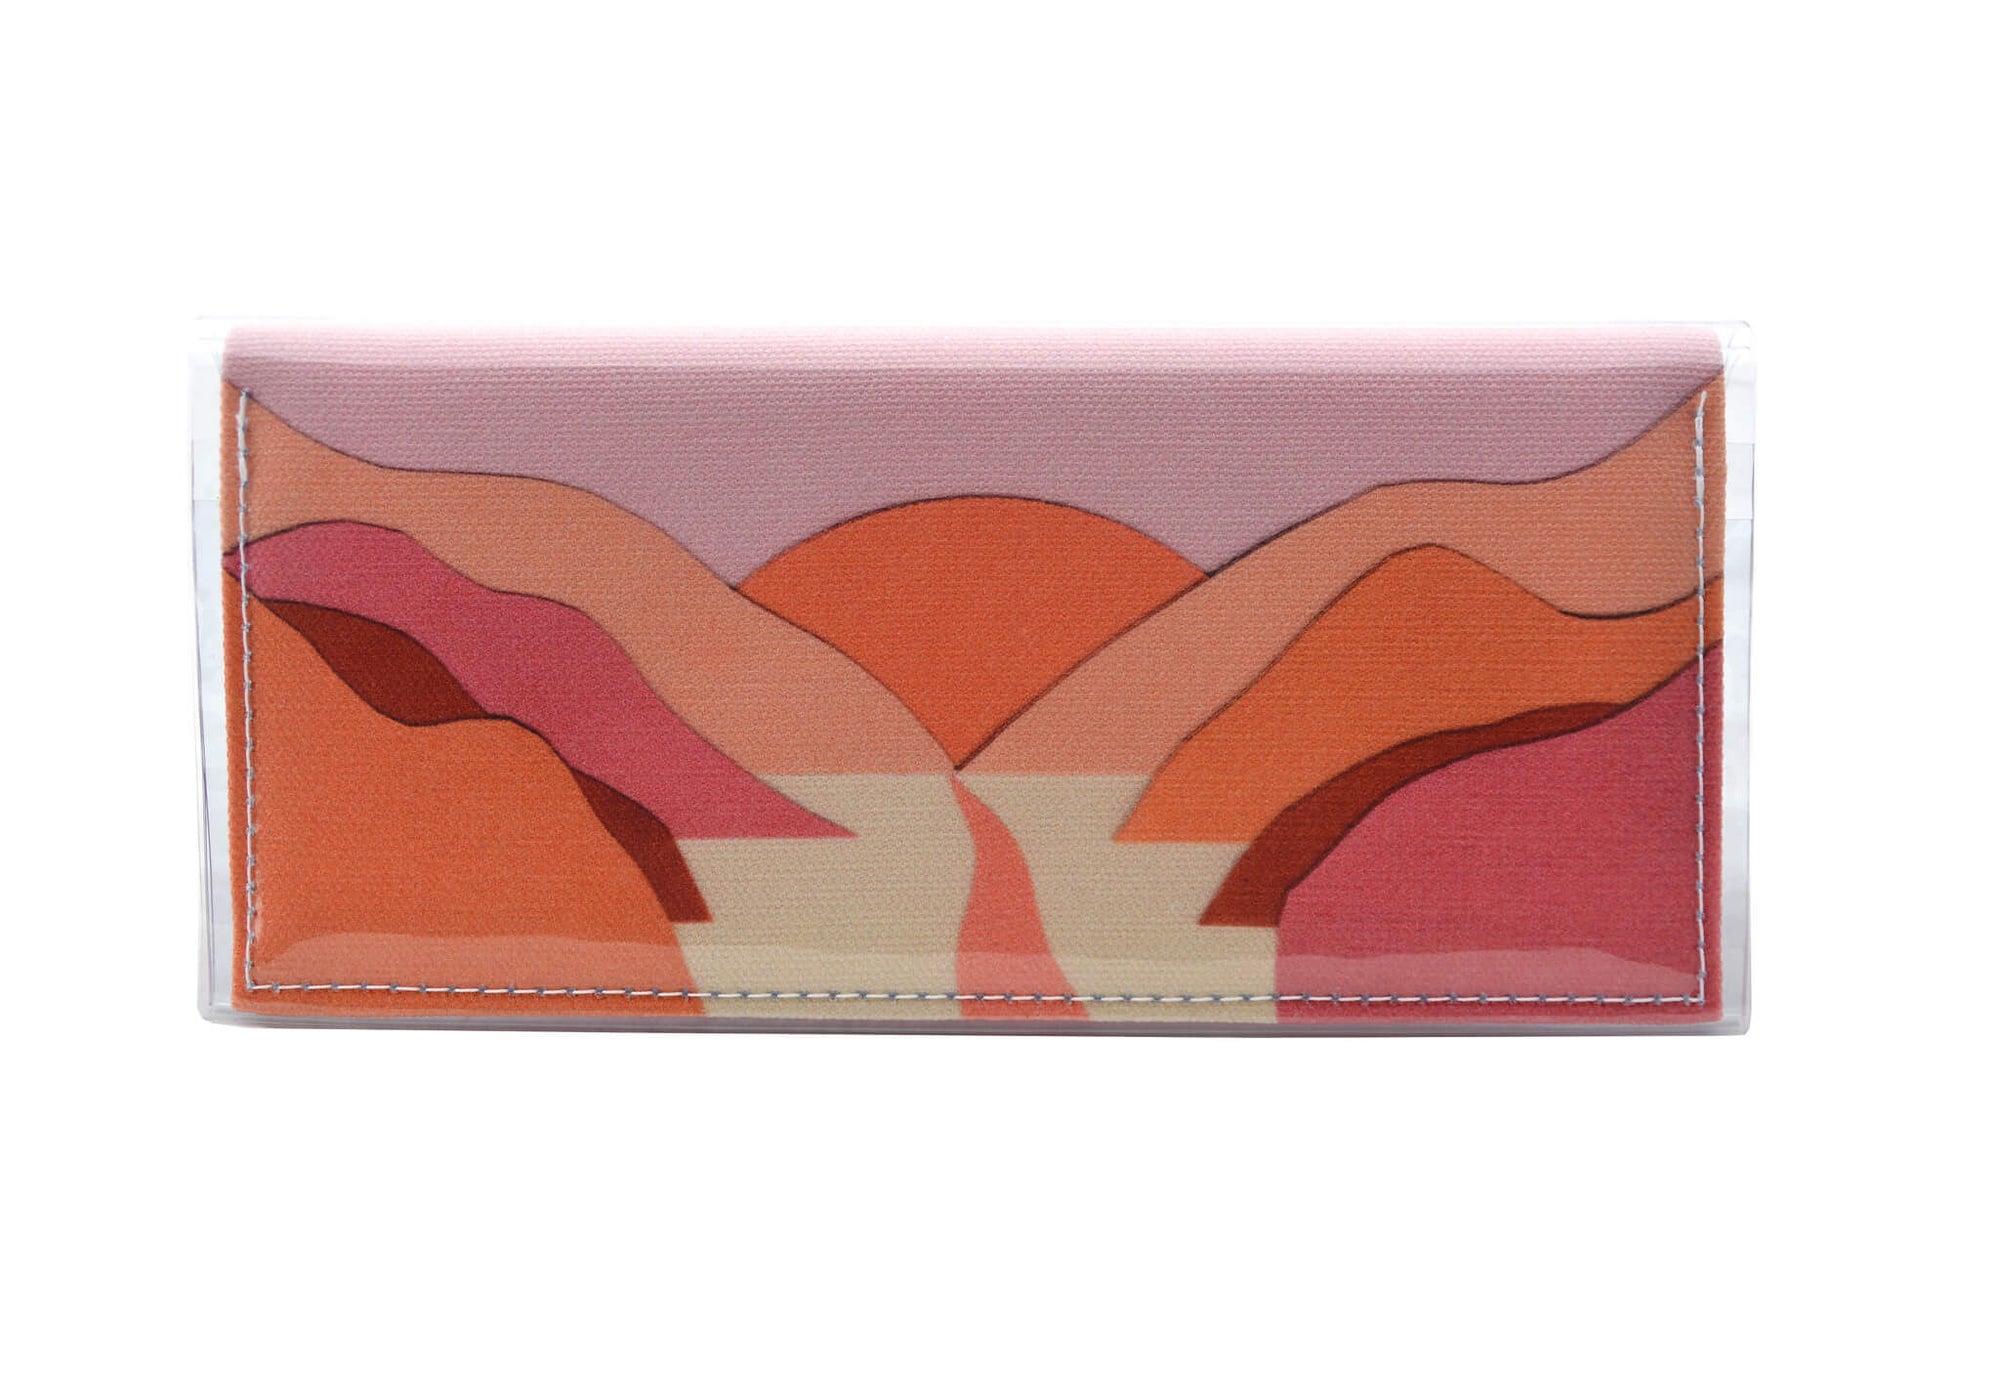 This is an image of the rear of a Kitty Came Home bifold purse clutch in 'The golden dawn' design by Satin and Tat. A path wends through a valley of pink and orange hills towards an orange rising sun. This is the standard size.